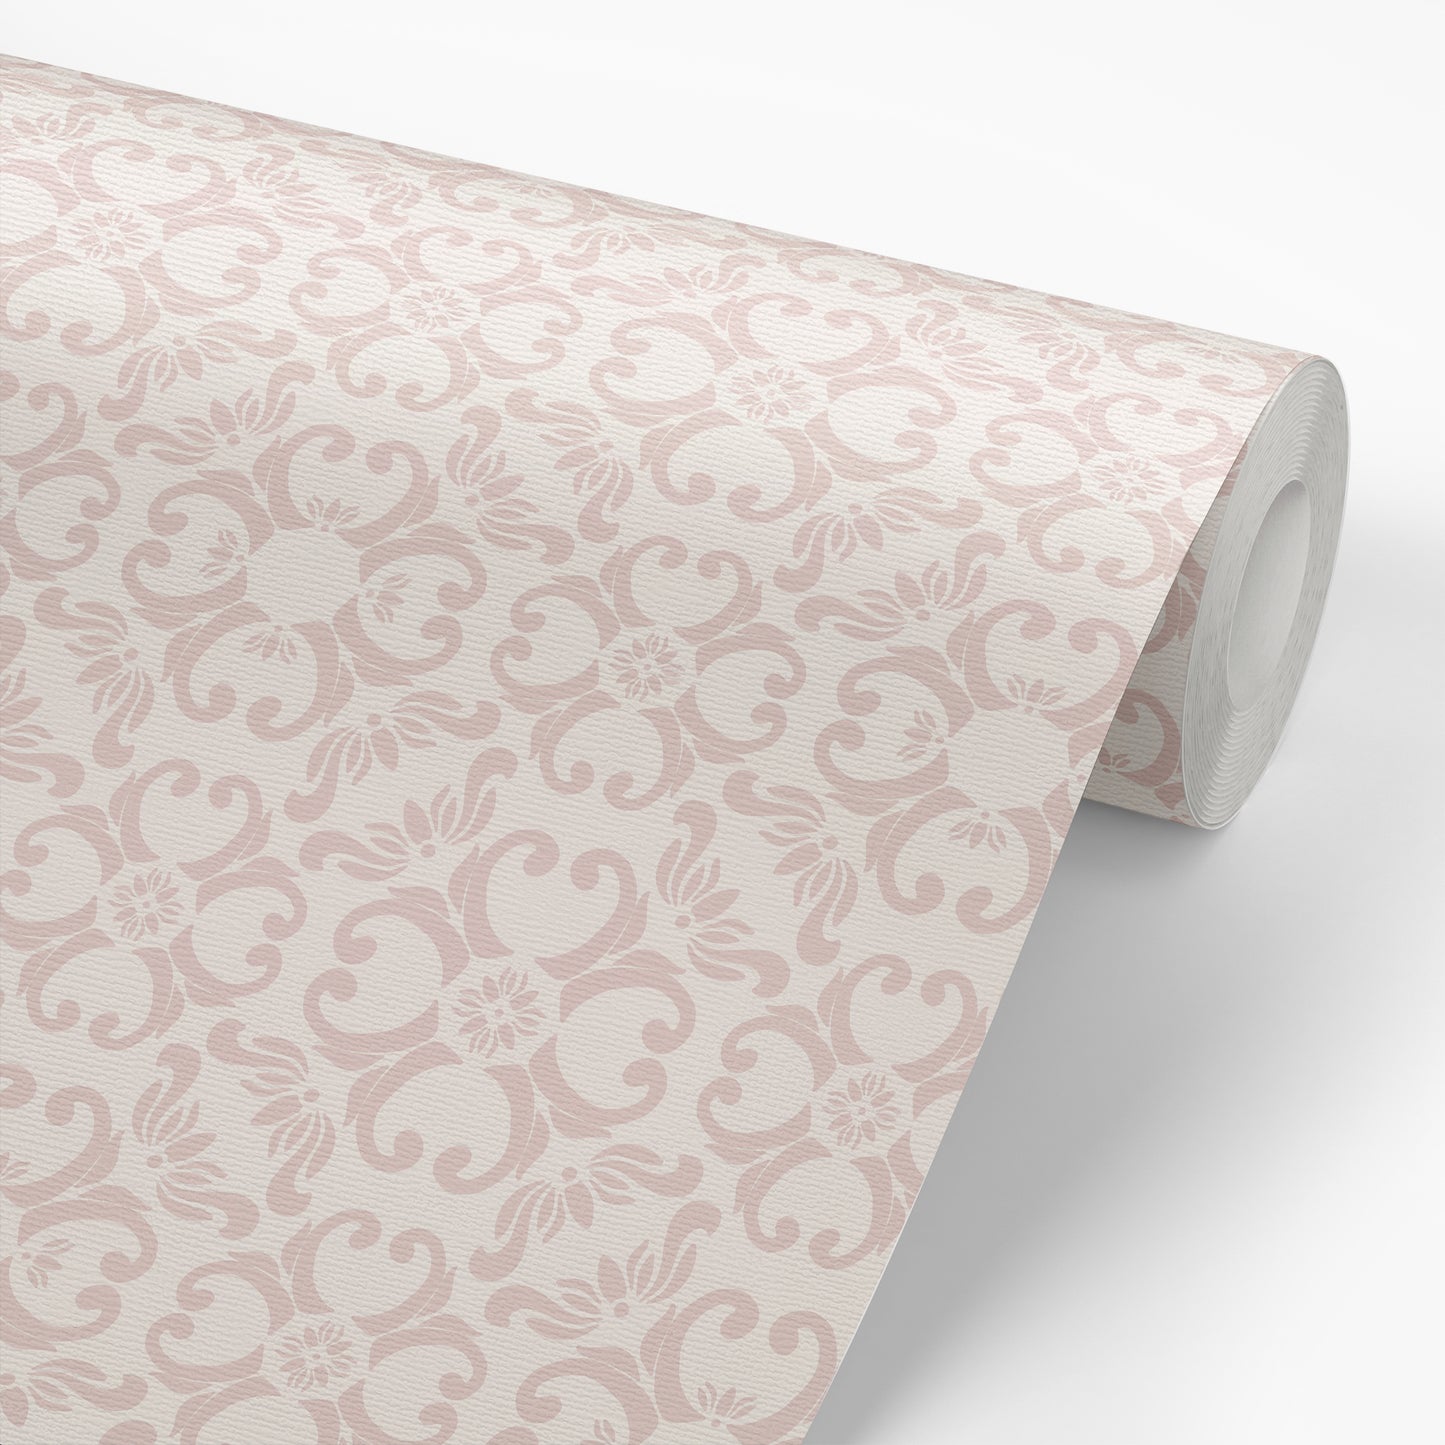 Ayara's peel and stick removable Spanish Tiles Wallpaper in Blush as a wallpaper roll.